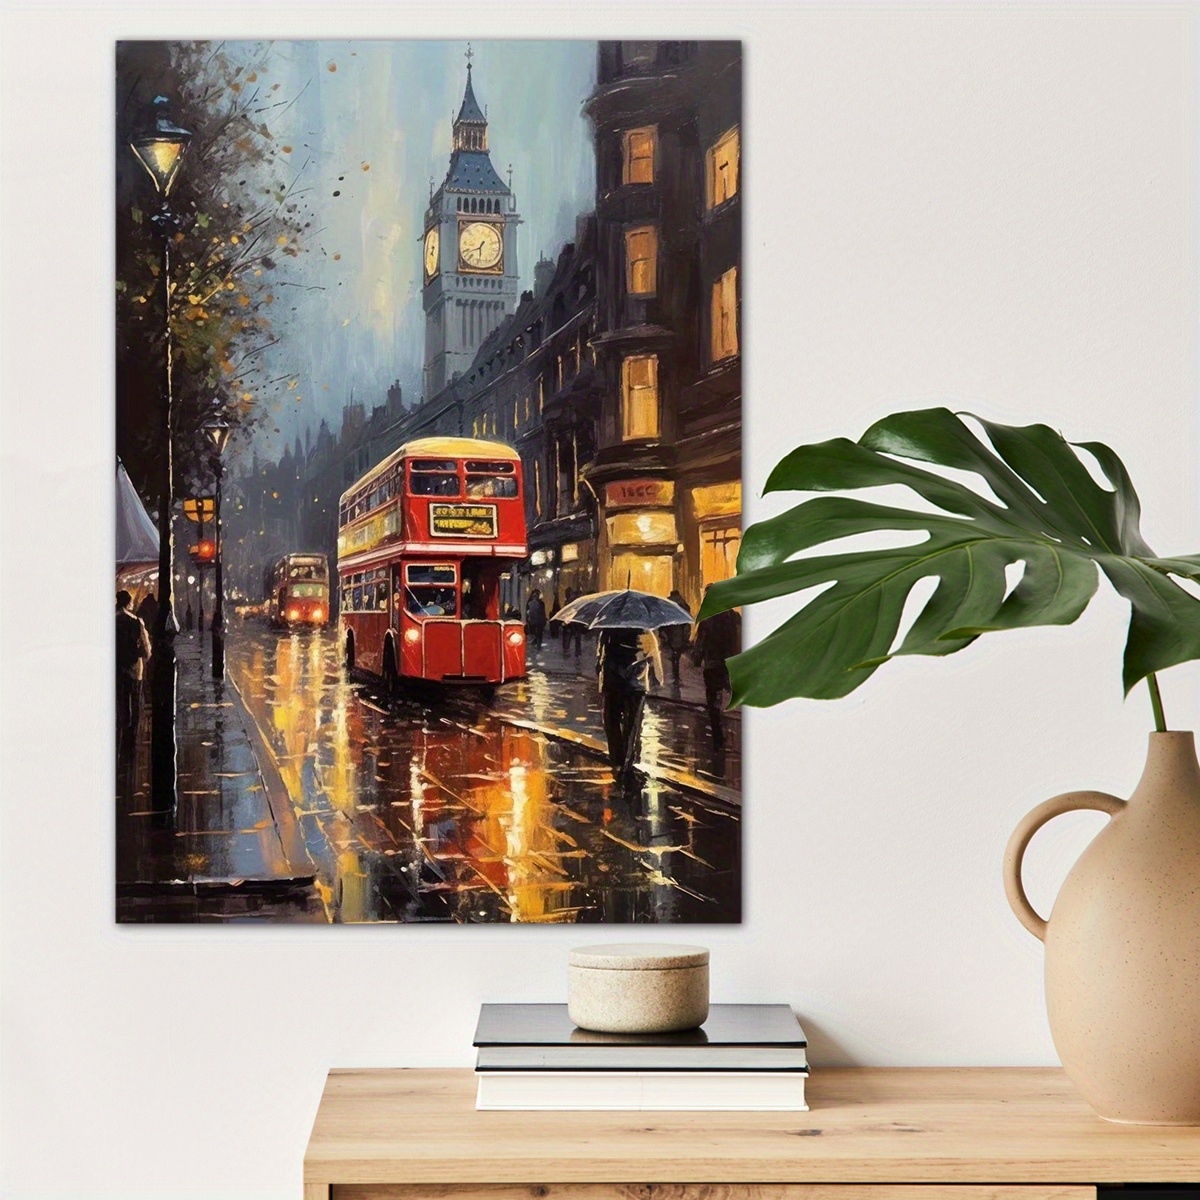 

1pc The Majesty Of London Canvas Wall Art For Home Decor, High Quality Wall Decor, Canvas Prints For Living Room Bedroom Bathroom Kitchen Office Cafe Decor, Perfect Gift And Decoration